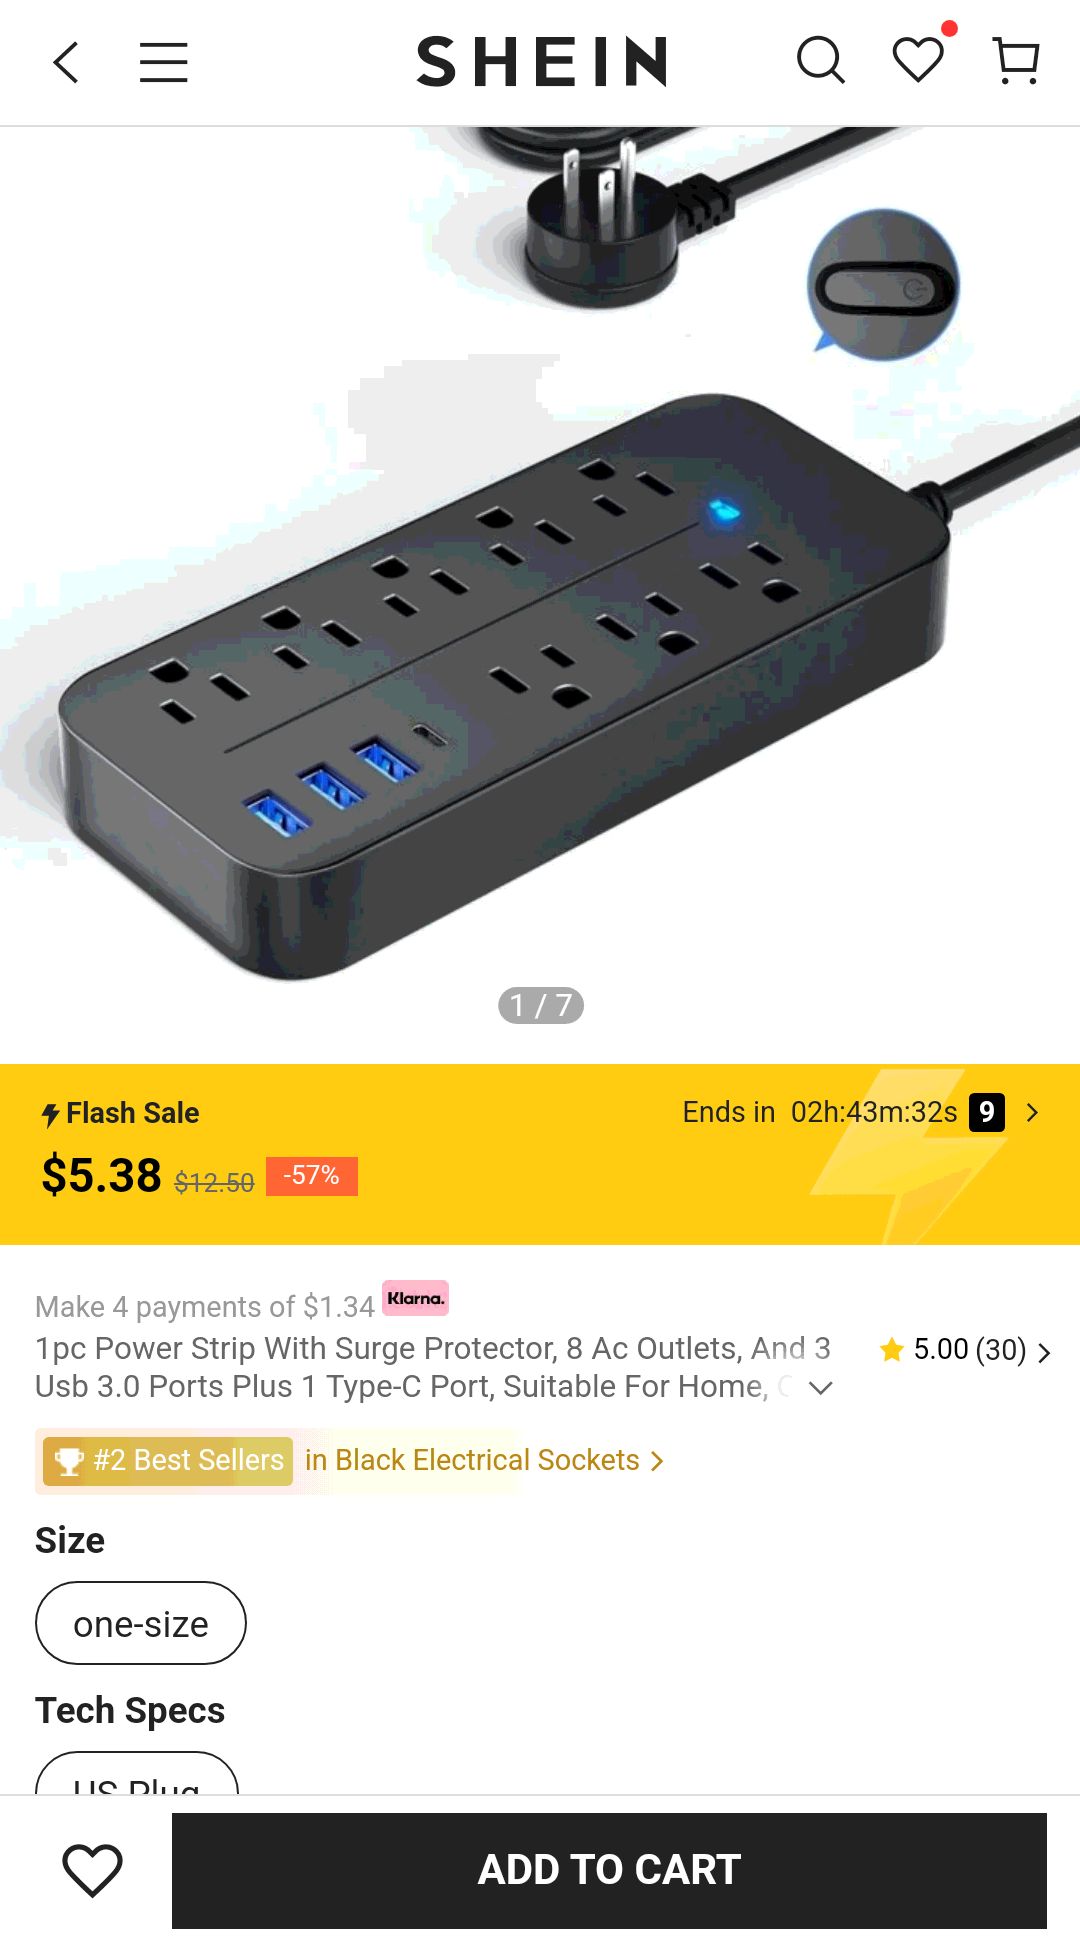 1pc Power Strip With Surge Protector, 8 Ac Outlets, And 3 Usb 3.0 Ports Plus 1 Type-c Port, Suitable For Home, Office, Kitchen, And Garage | SHEIN USA